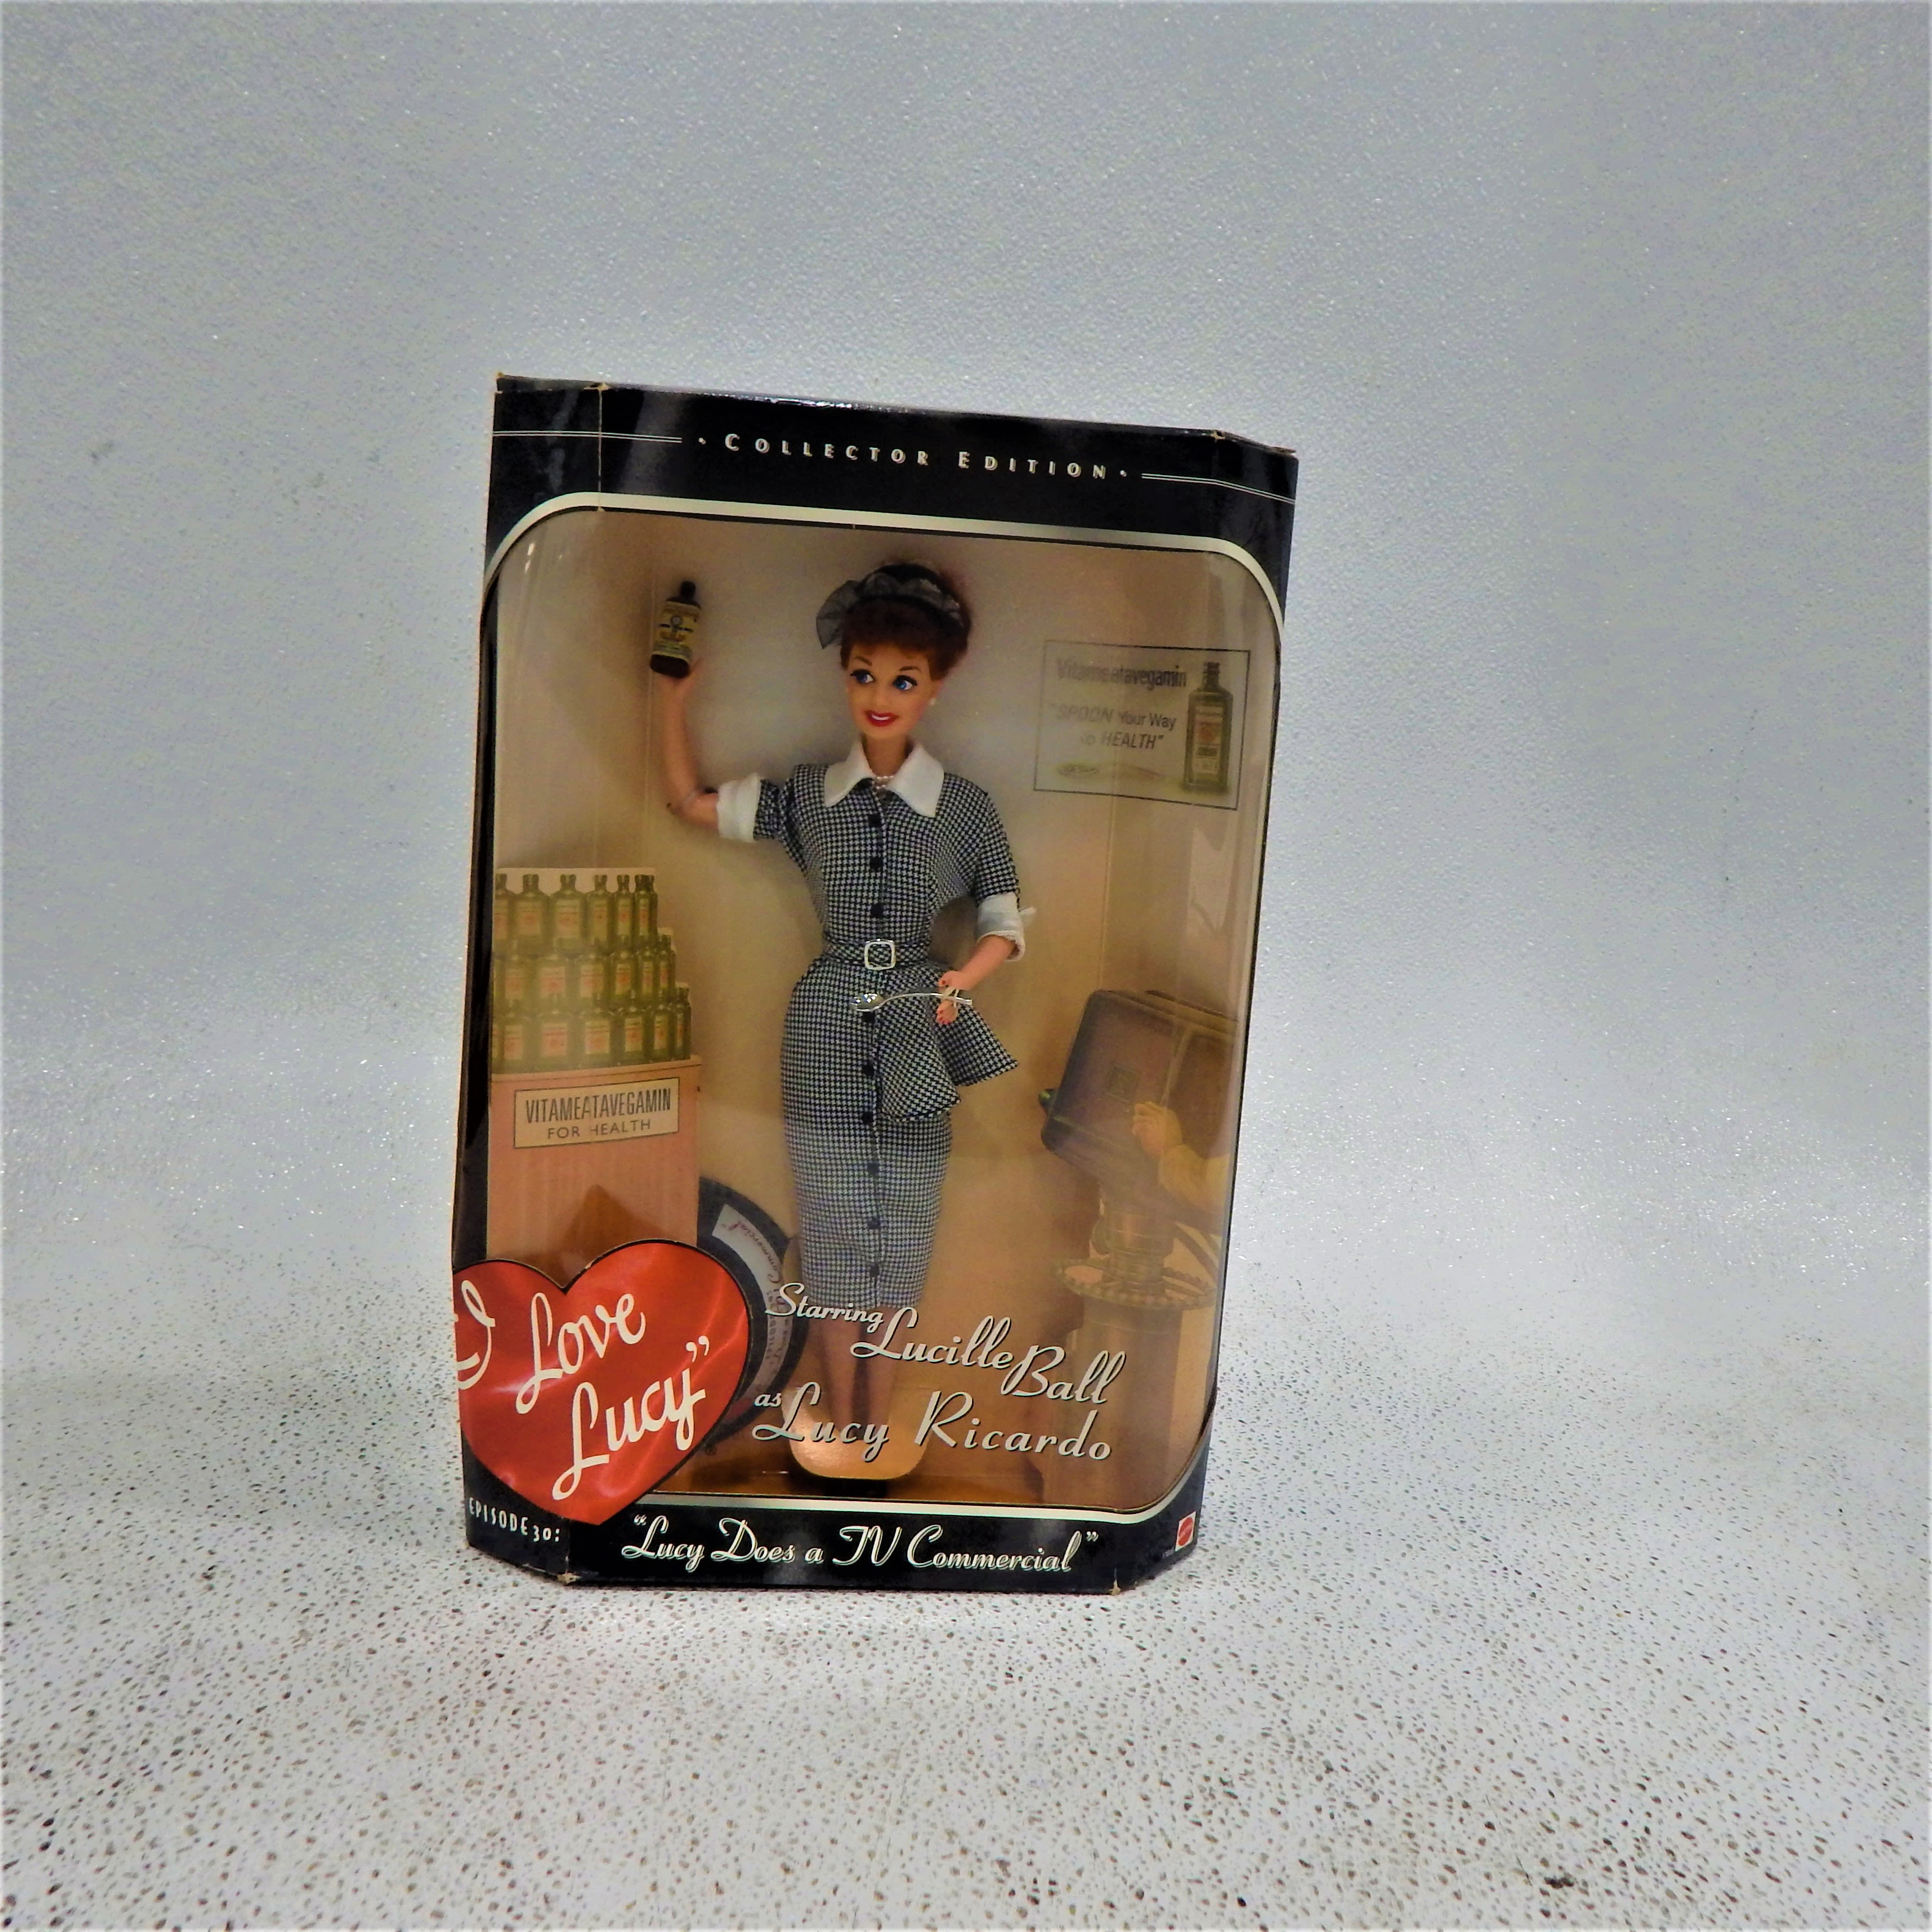 Buy the I love Lucy Episode 30 Lucy Does A TV Commercial Collector